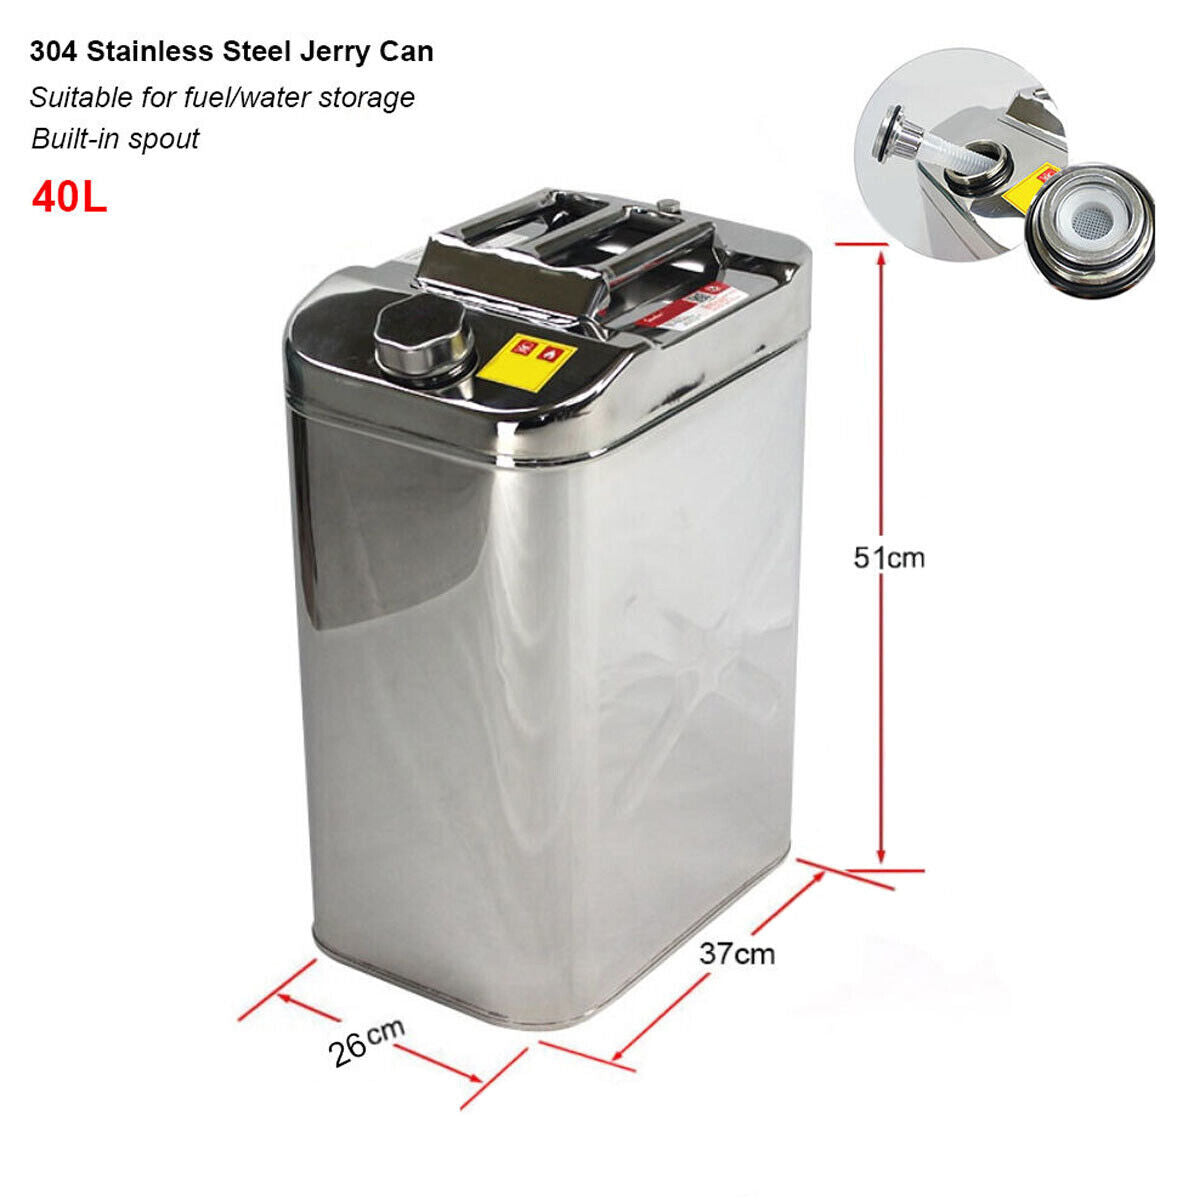 30L Jerry Can 304 Stainless Steel Fuel Water Storage for Caravan Car Boat